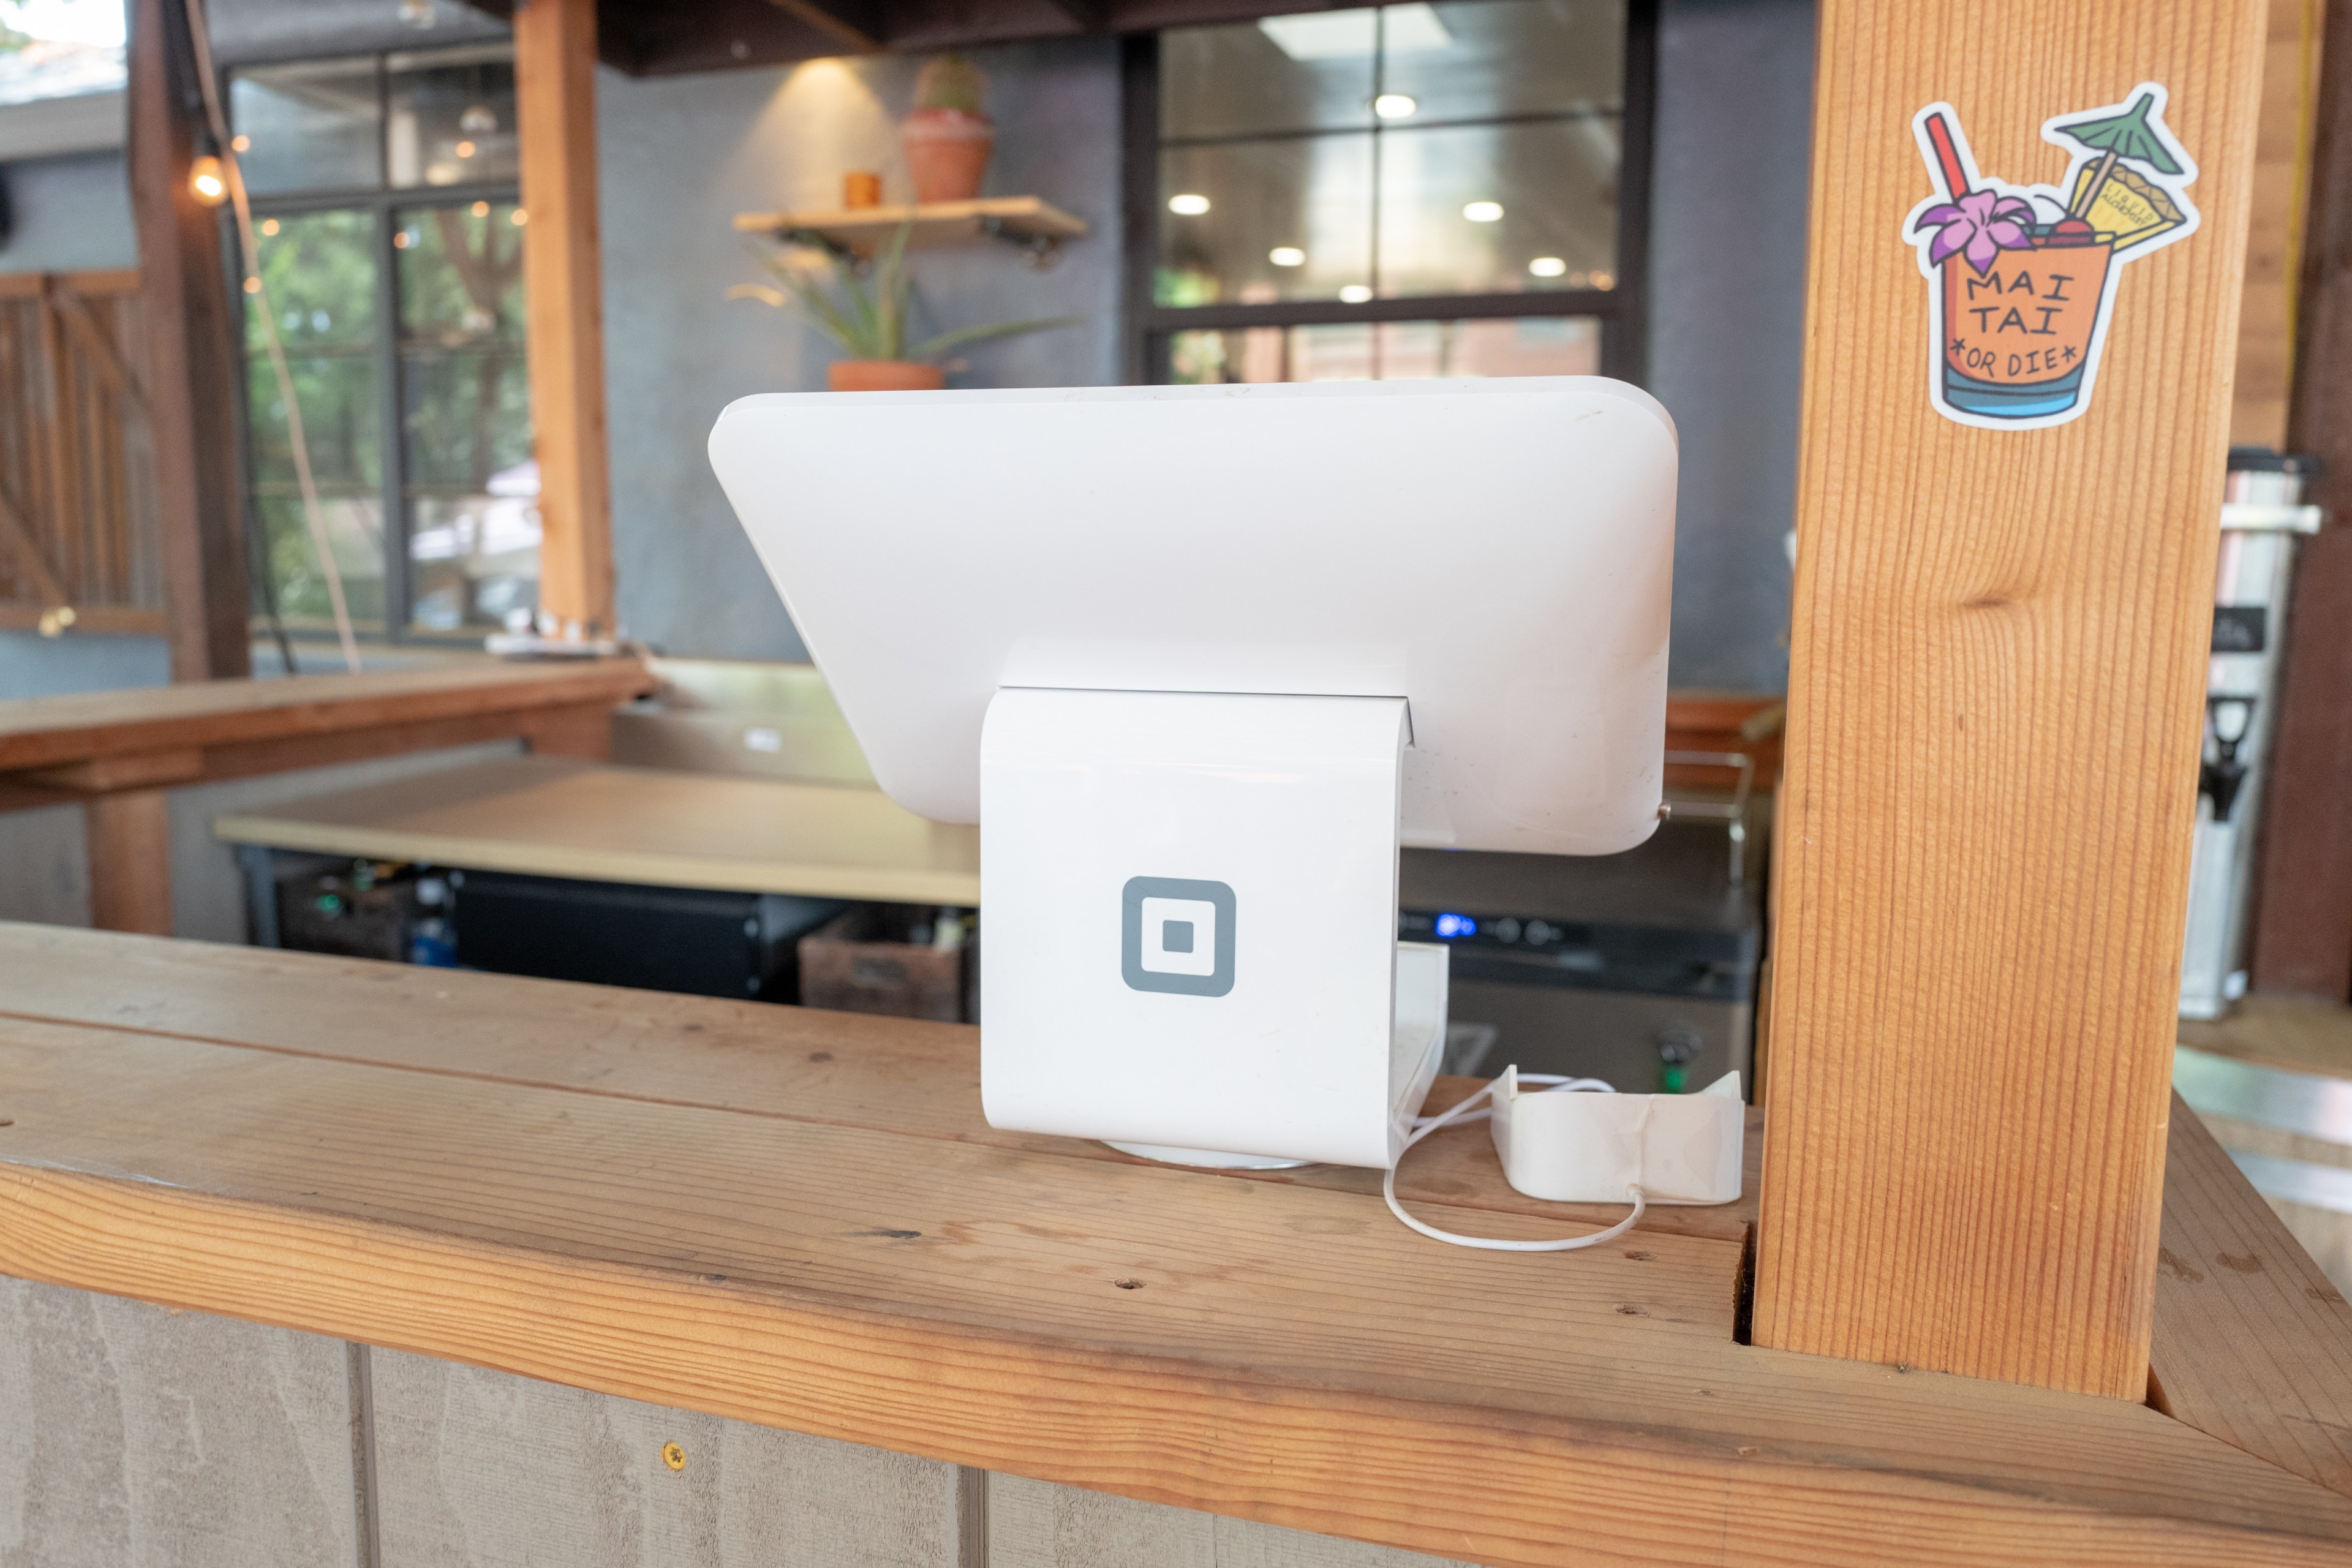 A white Square payment terminal placed on a wood counter. A sticker of a tiki drink with the words "mai tai" printed on it is placed on a column next to the counter.